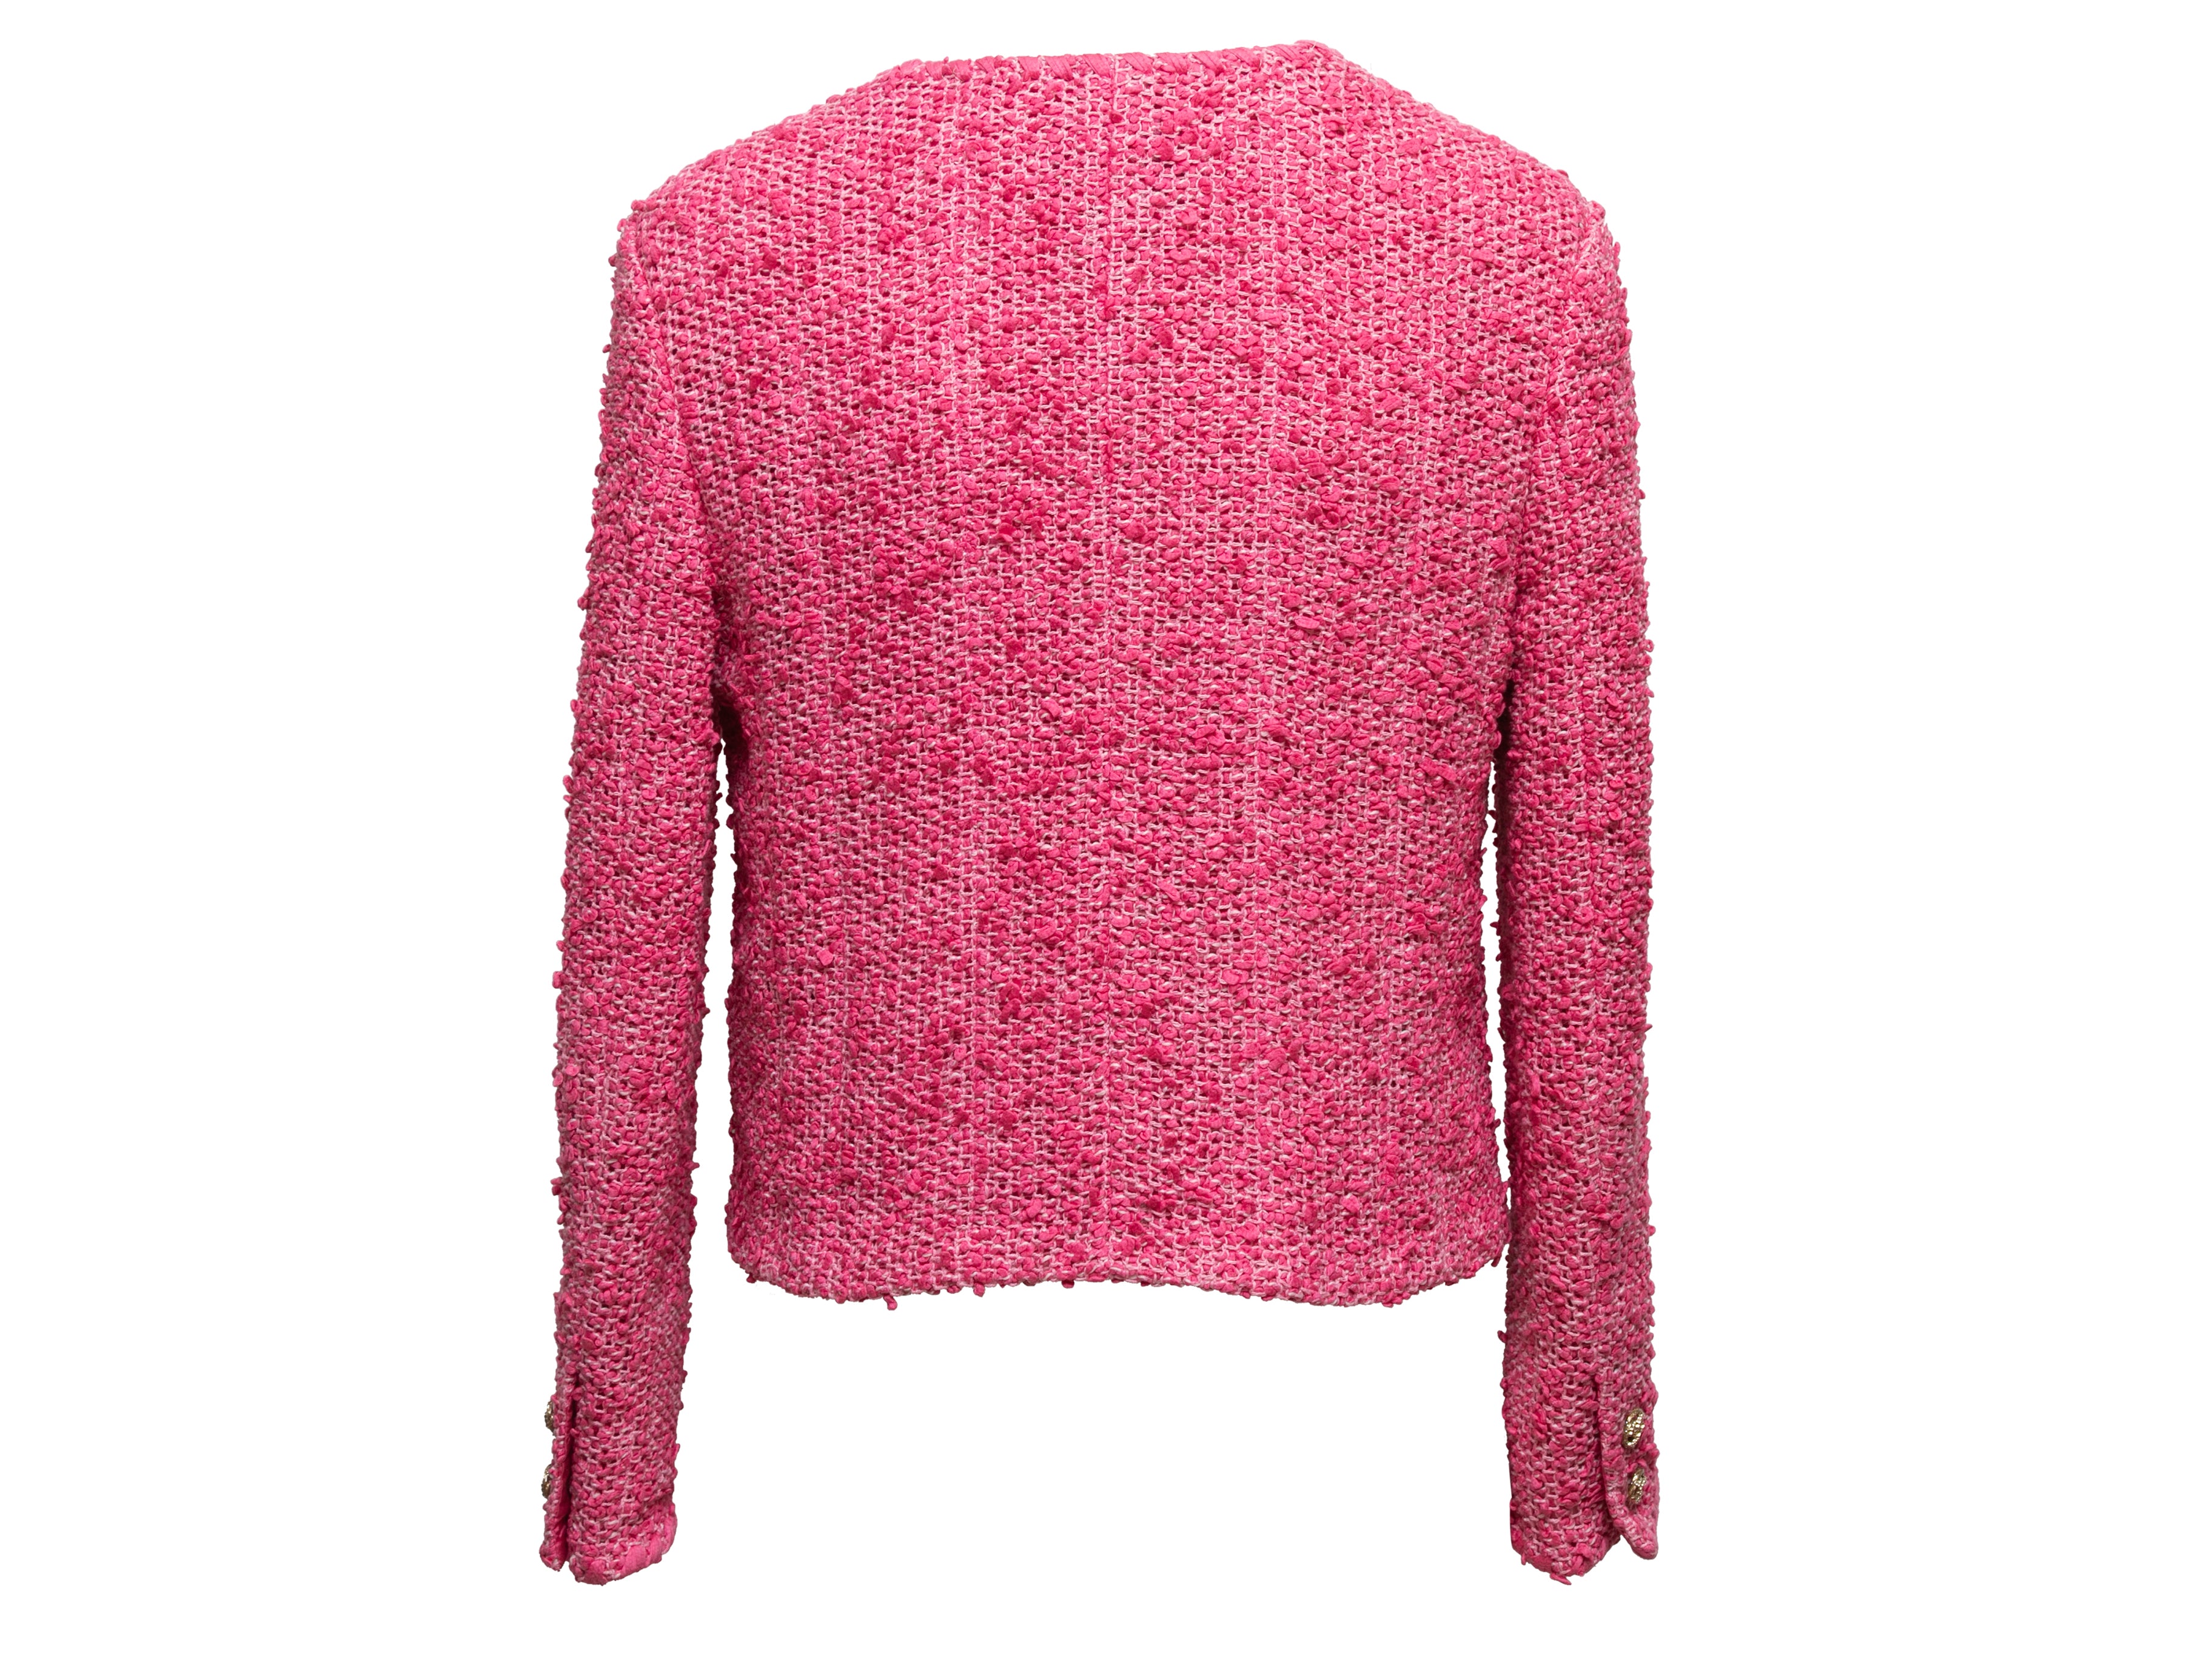 Chanel Red and Pink Tweed Biker Jacket, 2006 (Very Good), Apparel in Red/Pink